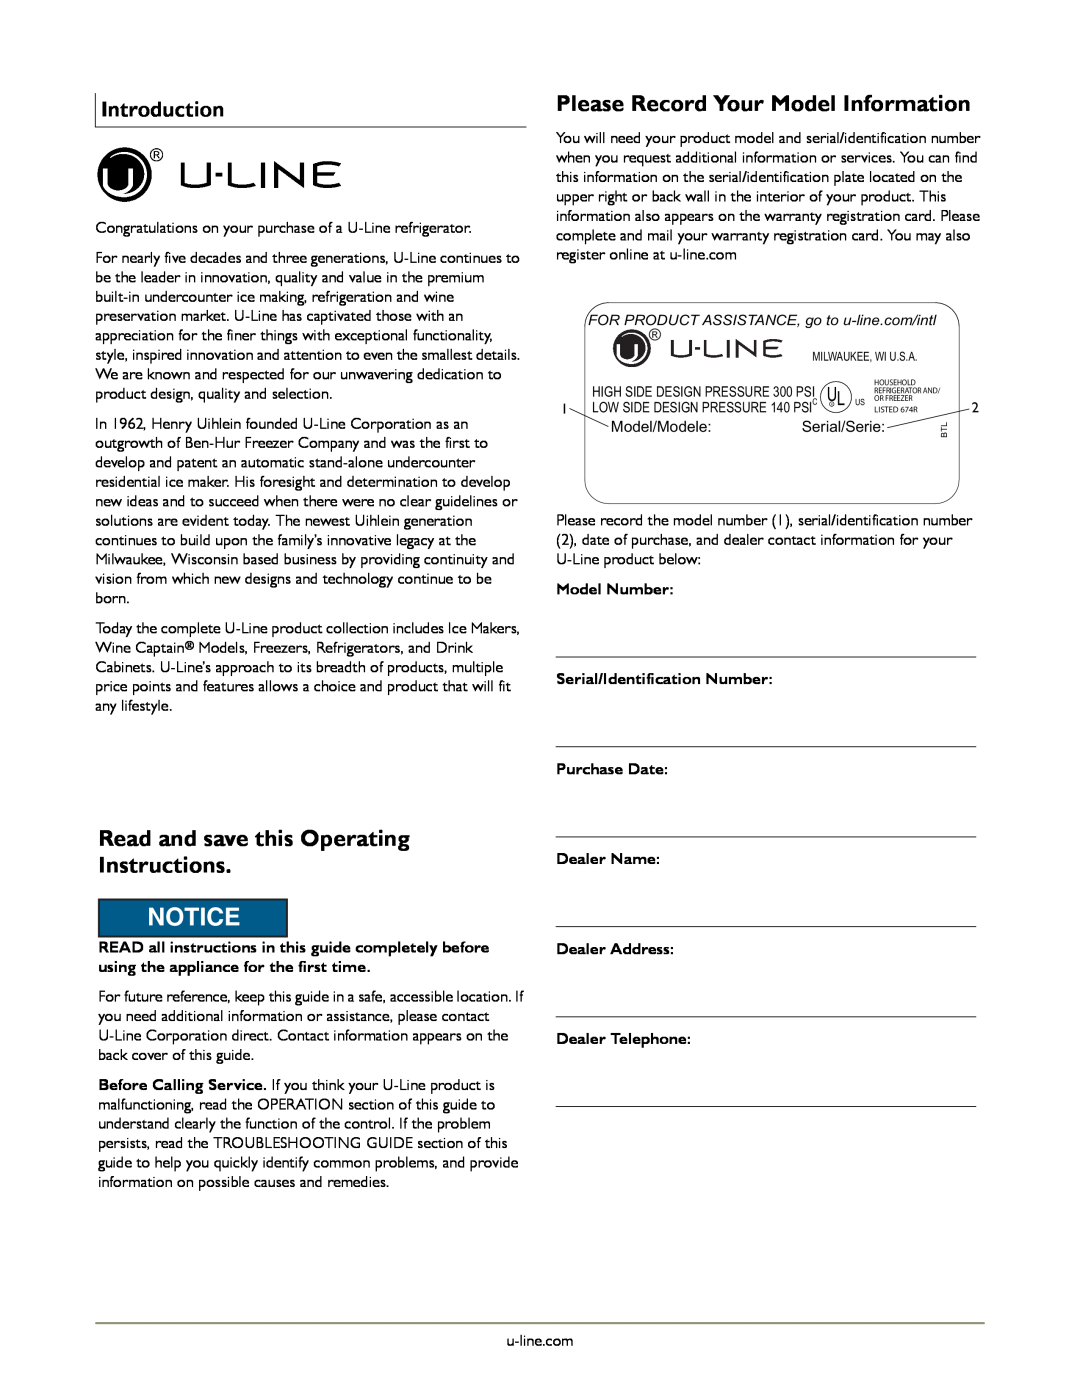 U-Line U-3060RDCOL-01 manual Please Record Your Model Information, Read and save this Operating Instructions, Introduction 